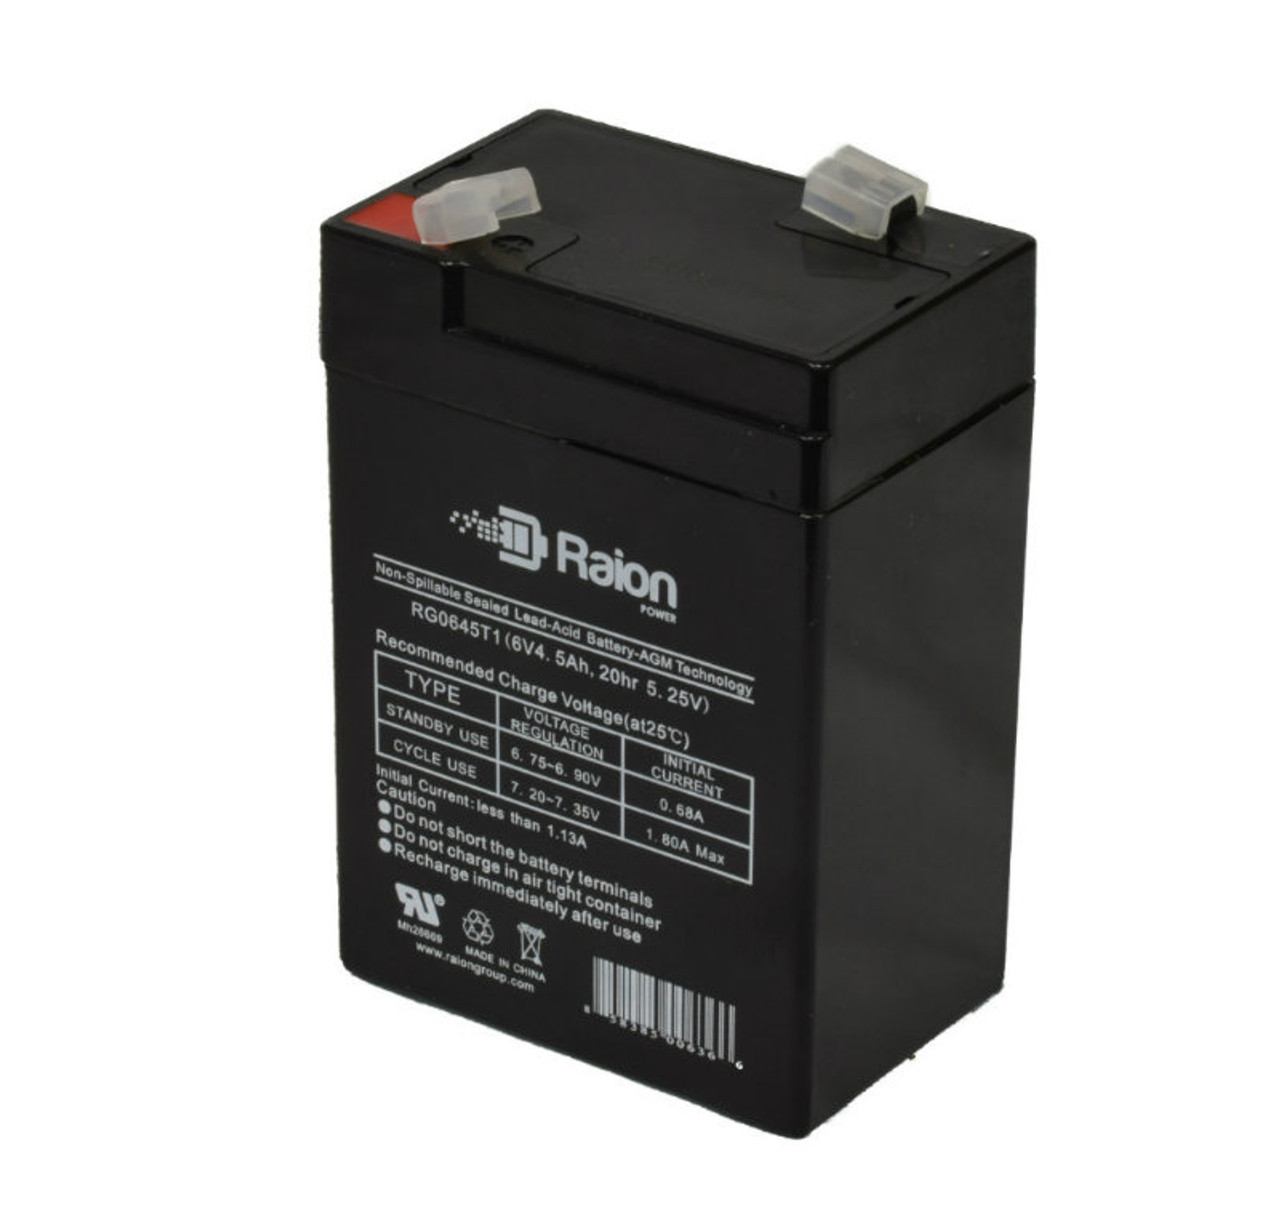 Raion Power RG0645T1 6V 4.5Ah Replacement Battery Cartridge for MK ES4-6